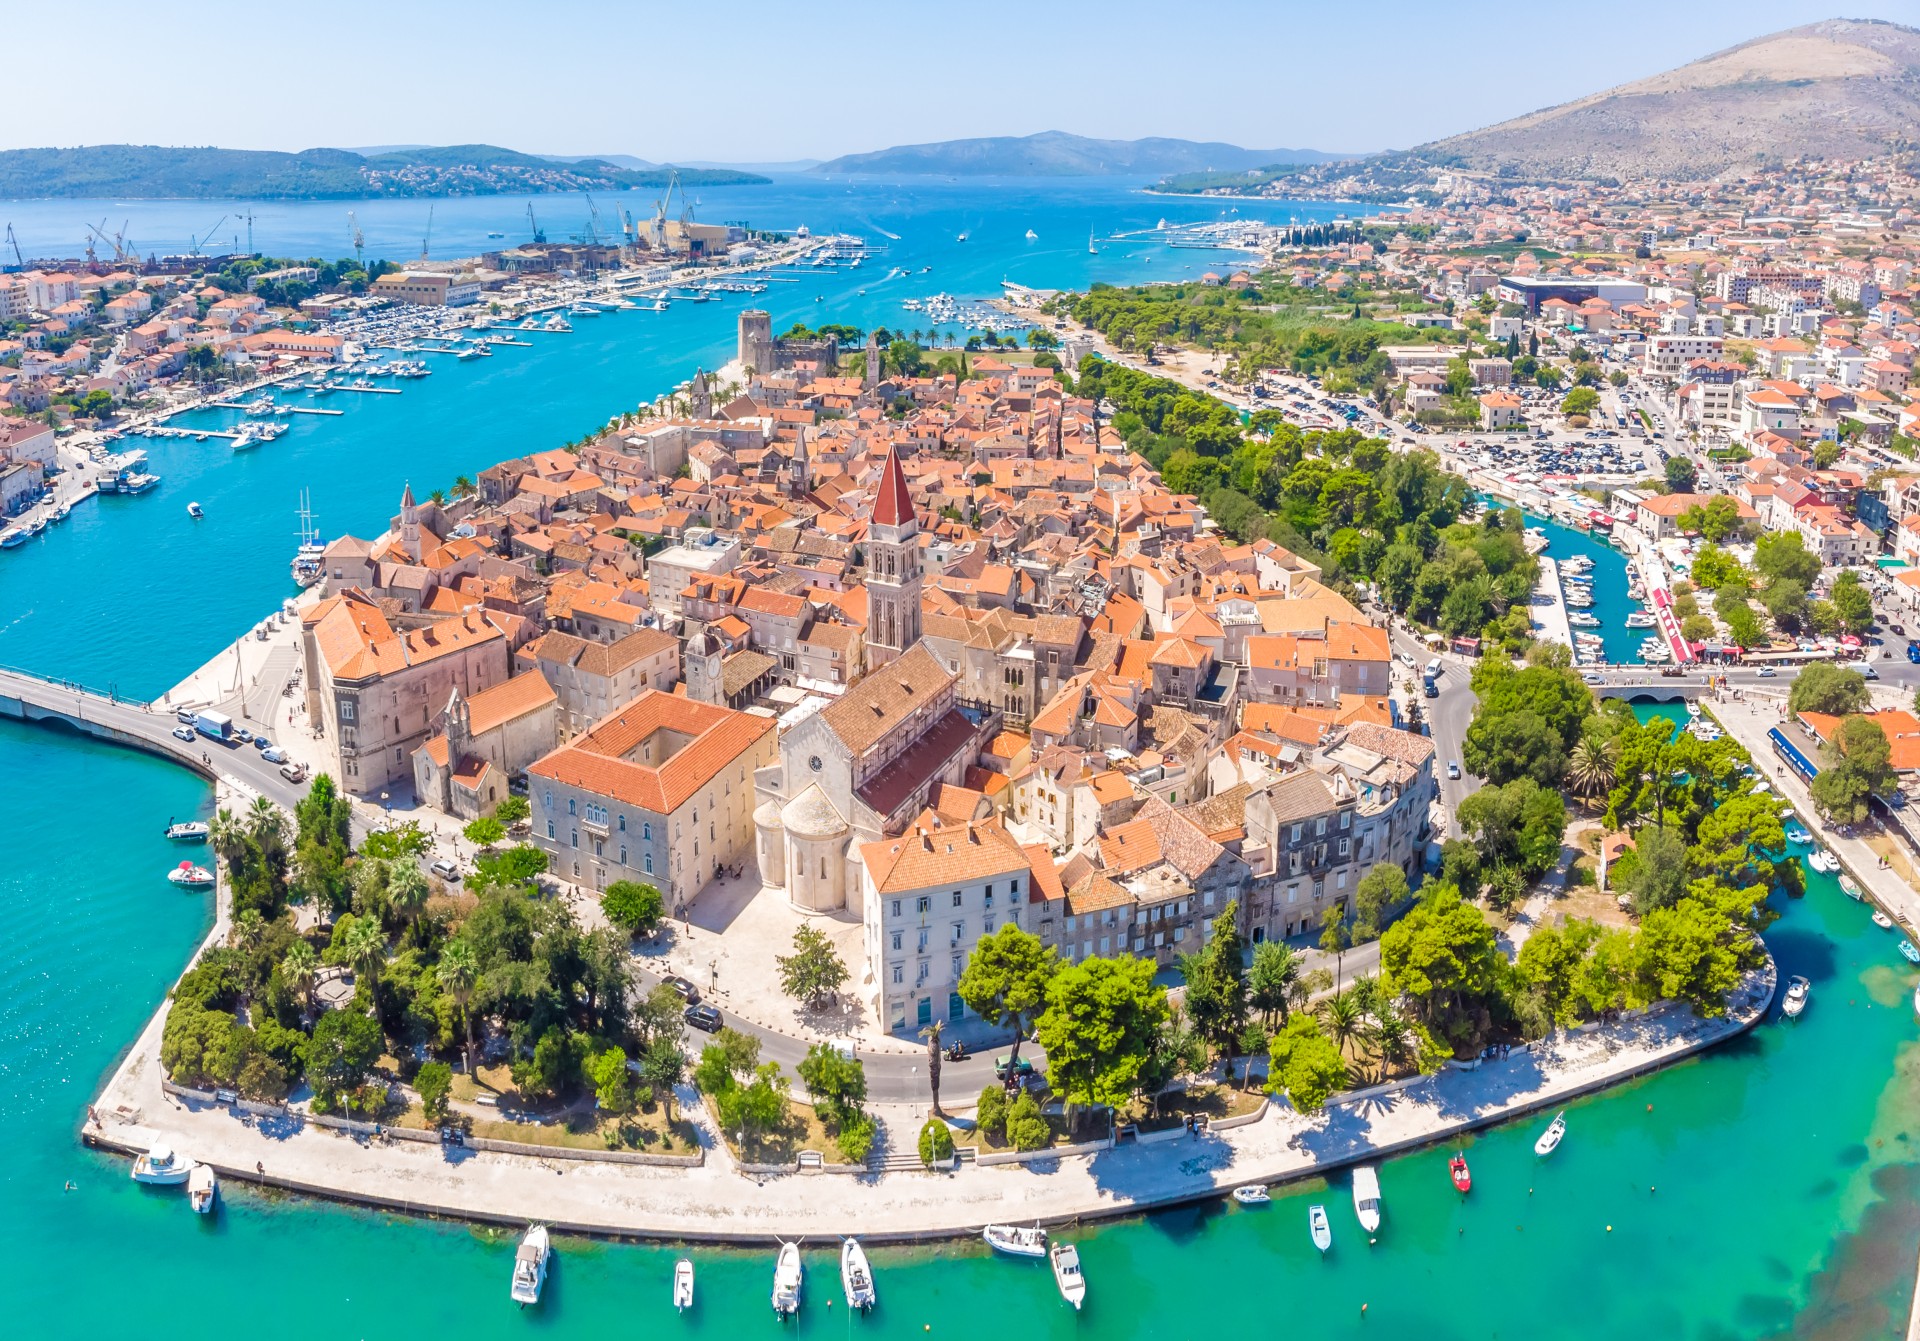 Trogir, Small Town of Great Beauty